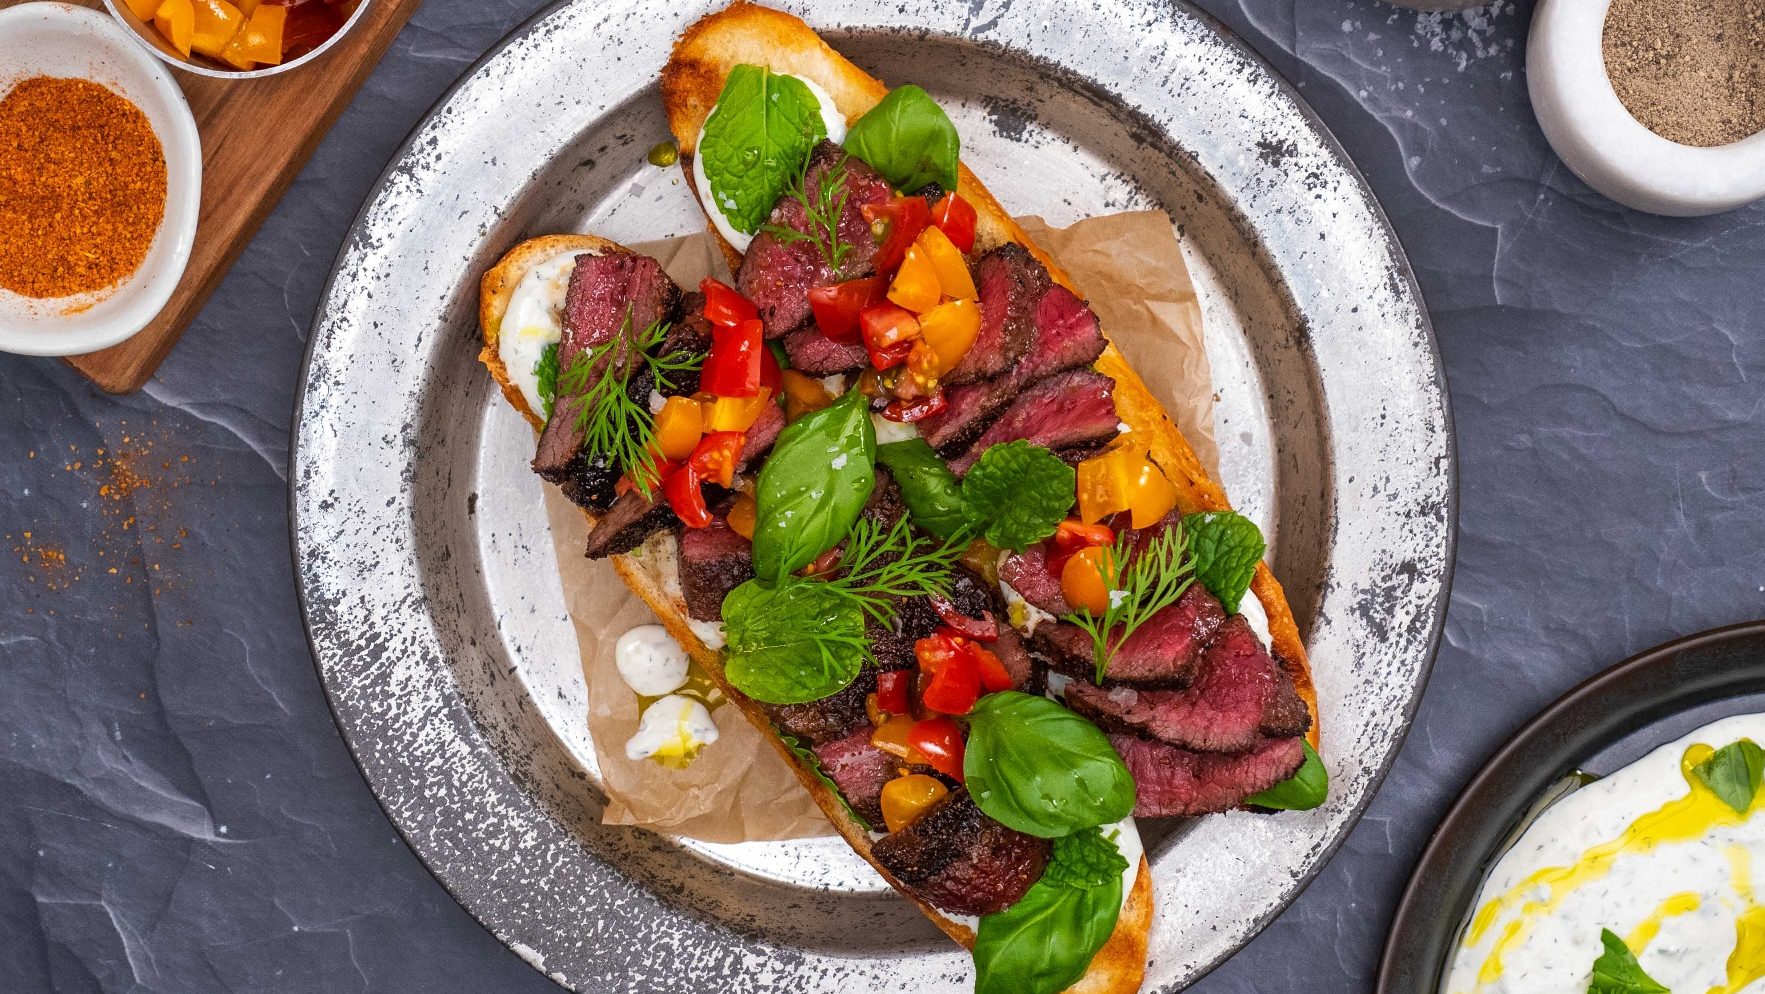 Philly style sliced Venison steak sandwich duo, grilled on the BBQ and served with choice toppings of tzatziki, capsicum, tomatoes, dill and mint.